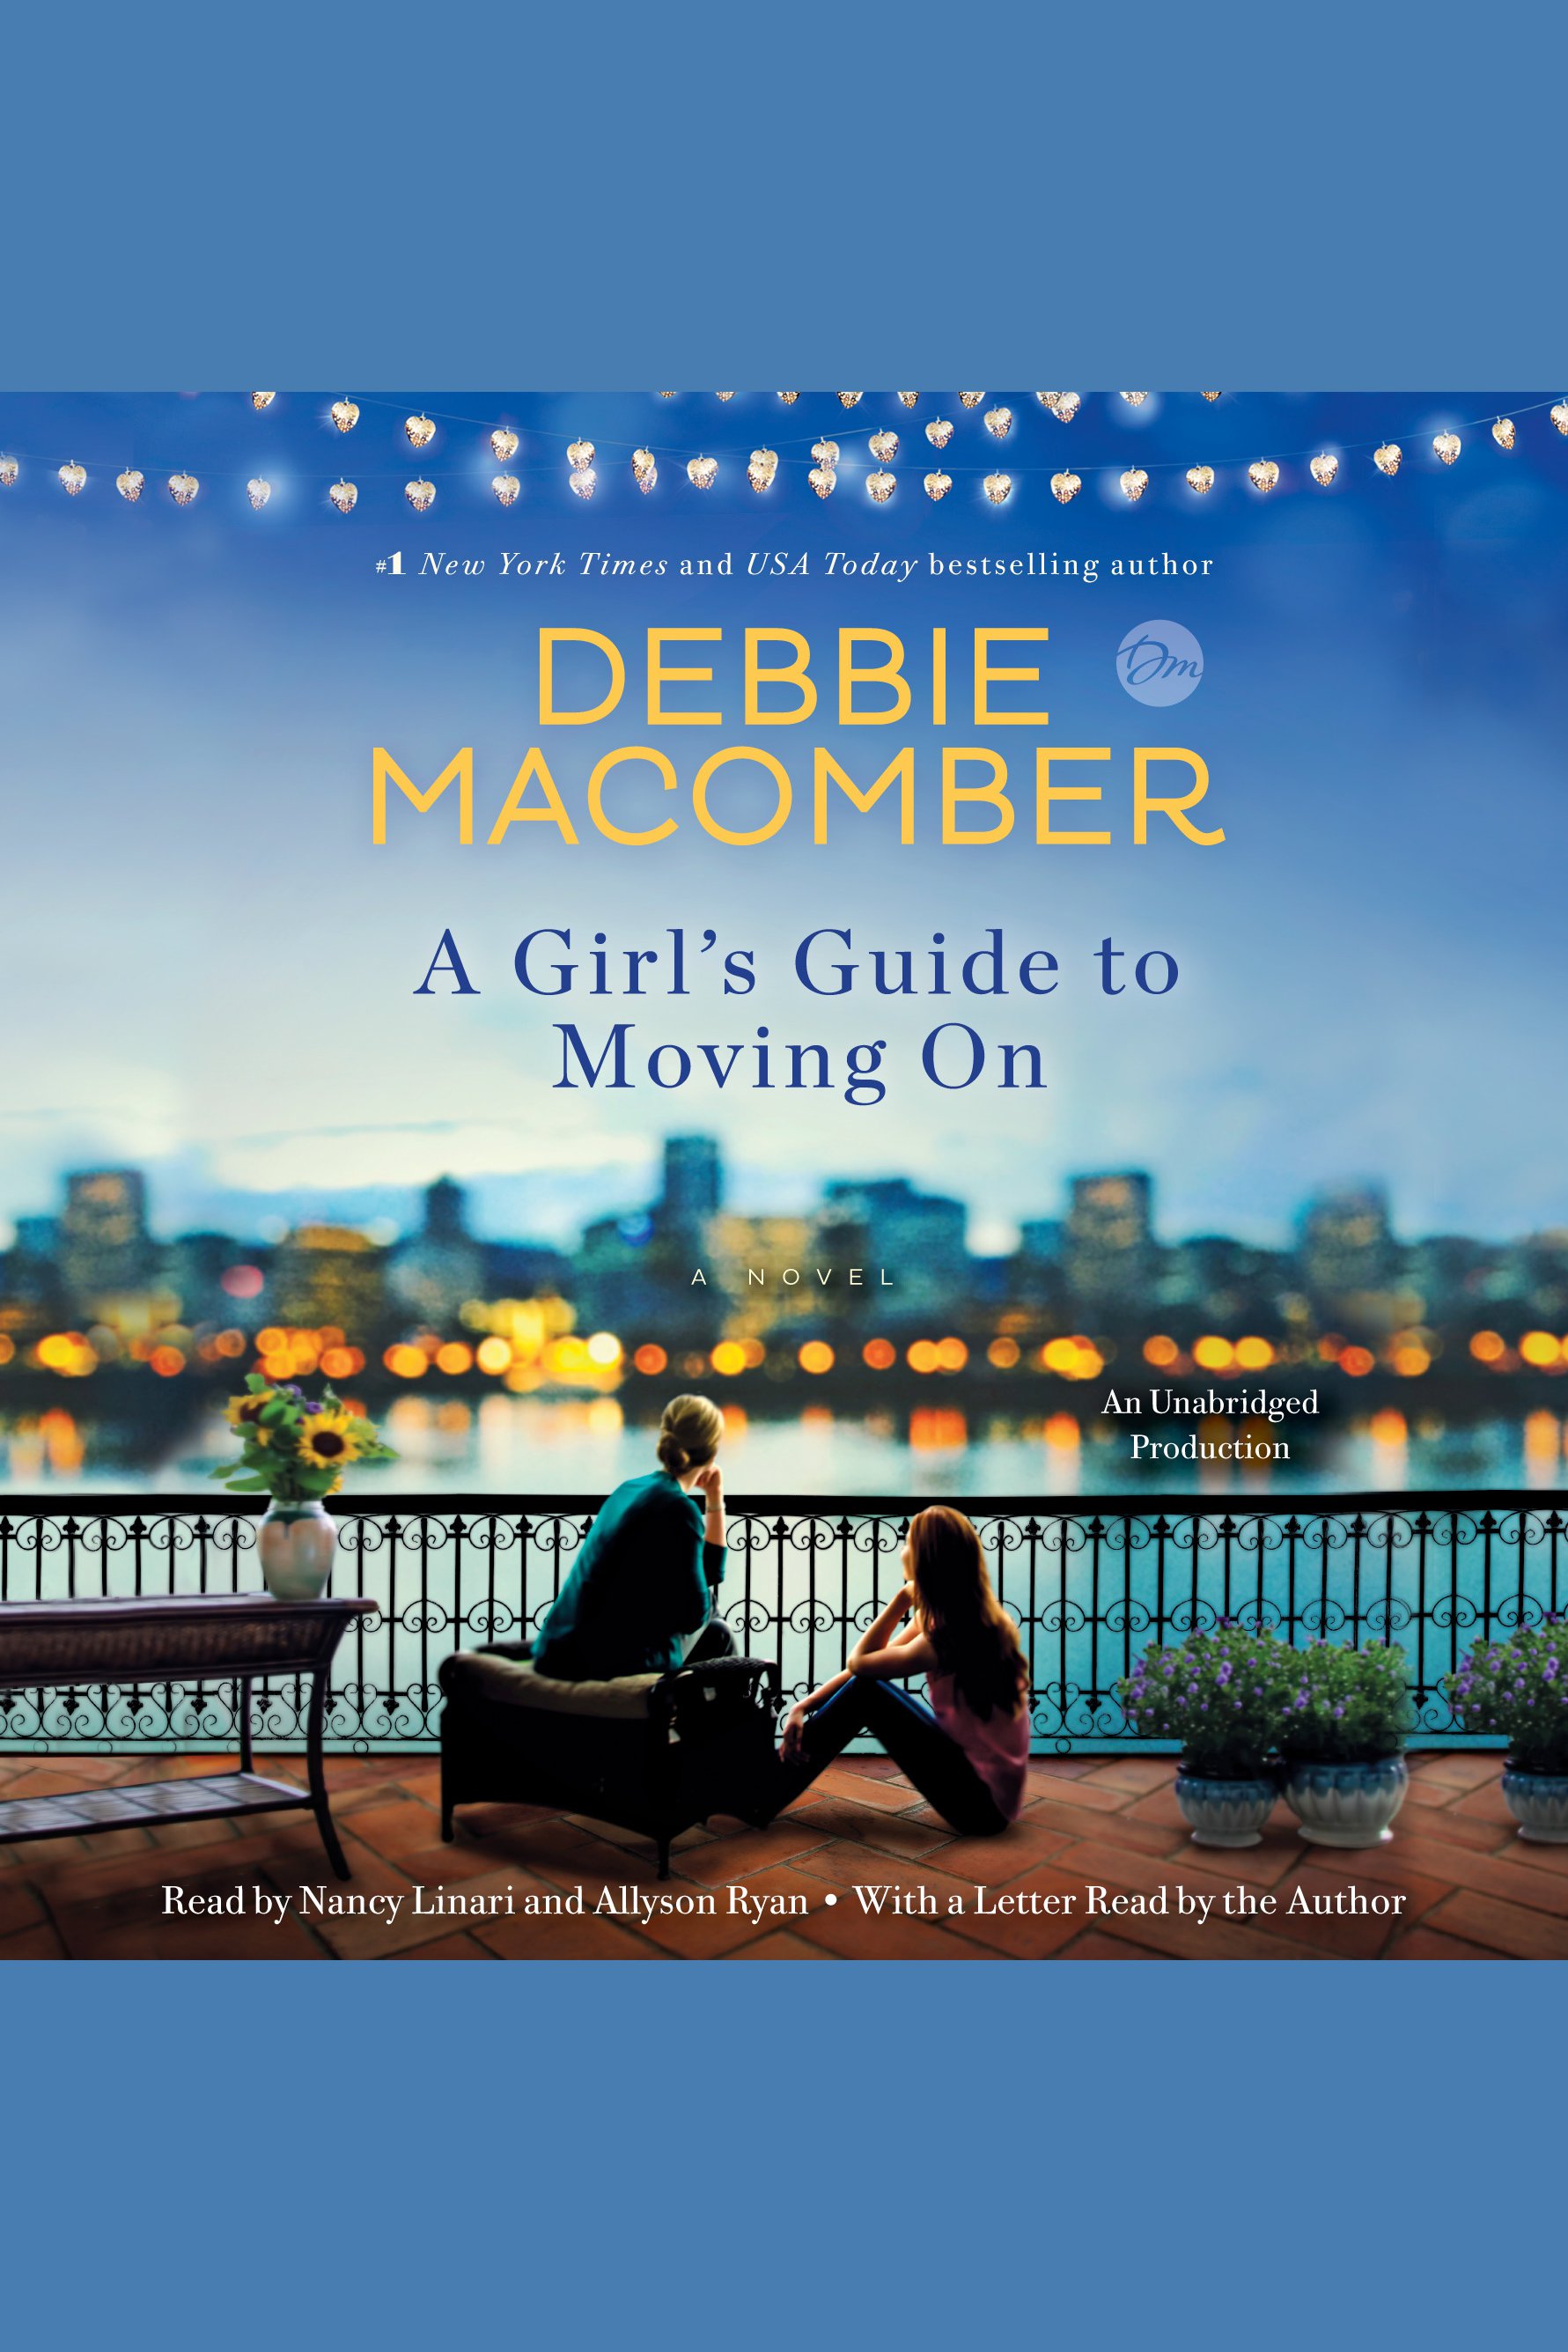 Image de couverture de Girl's Guide to Moving On, A [electronic resource] : A Novel